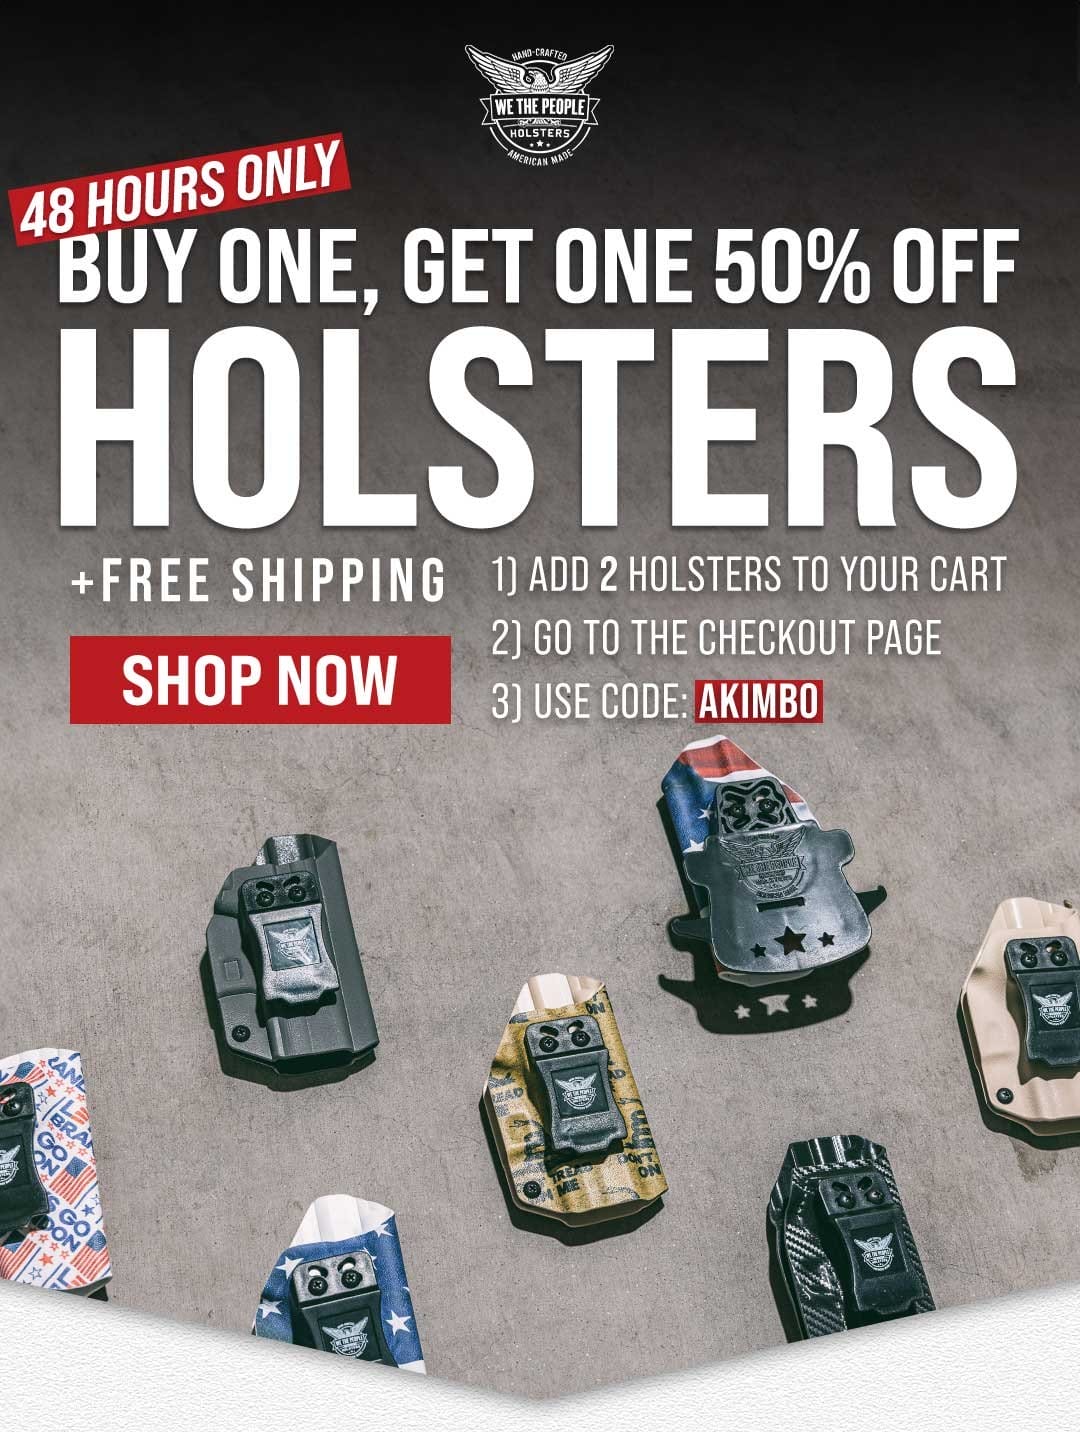 BOGO Holsters w/ Code AKIMBO for a limited time